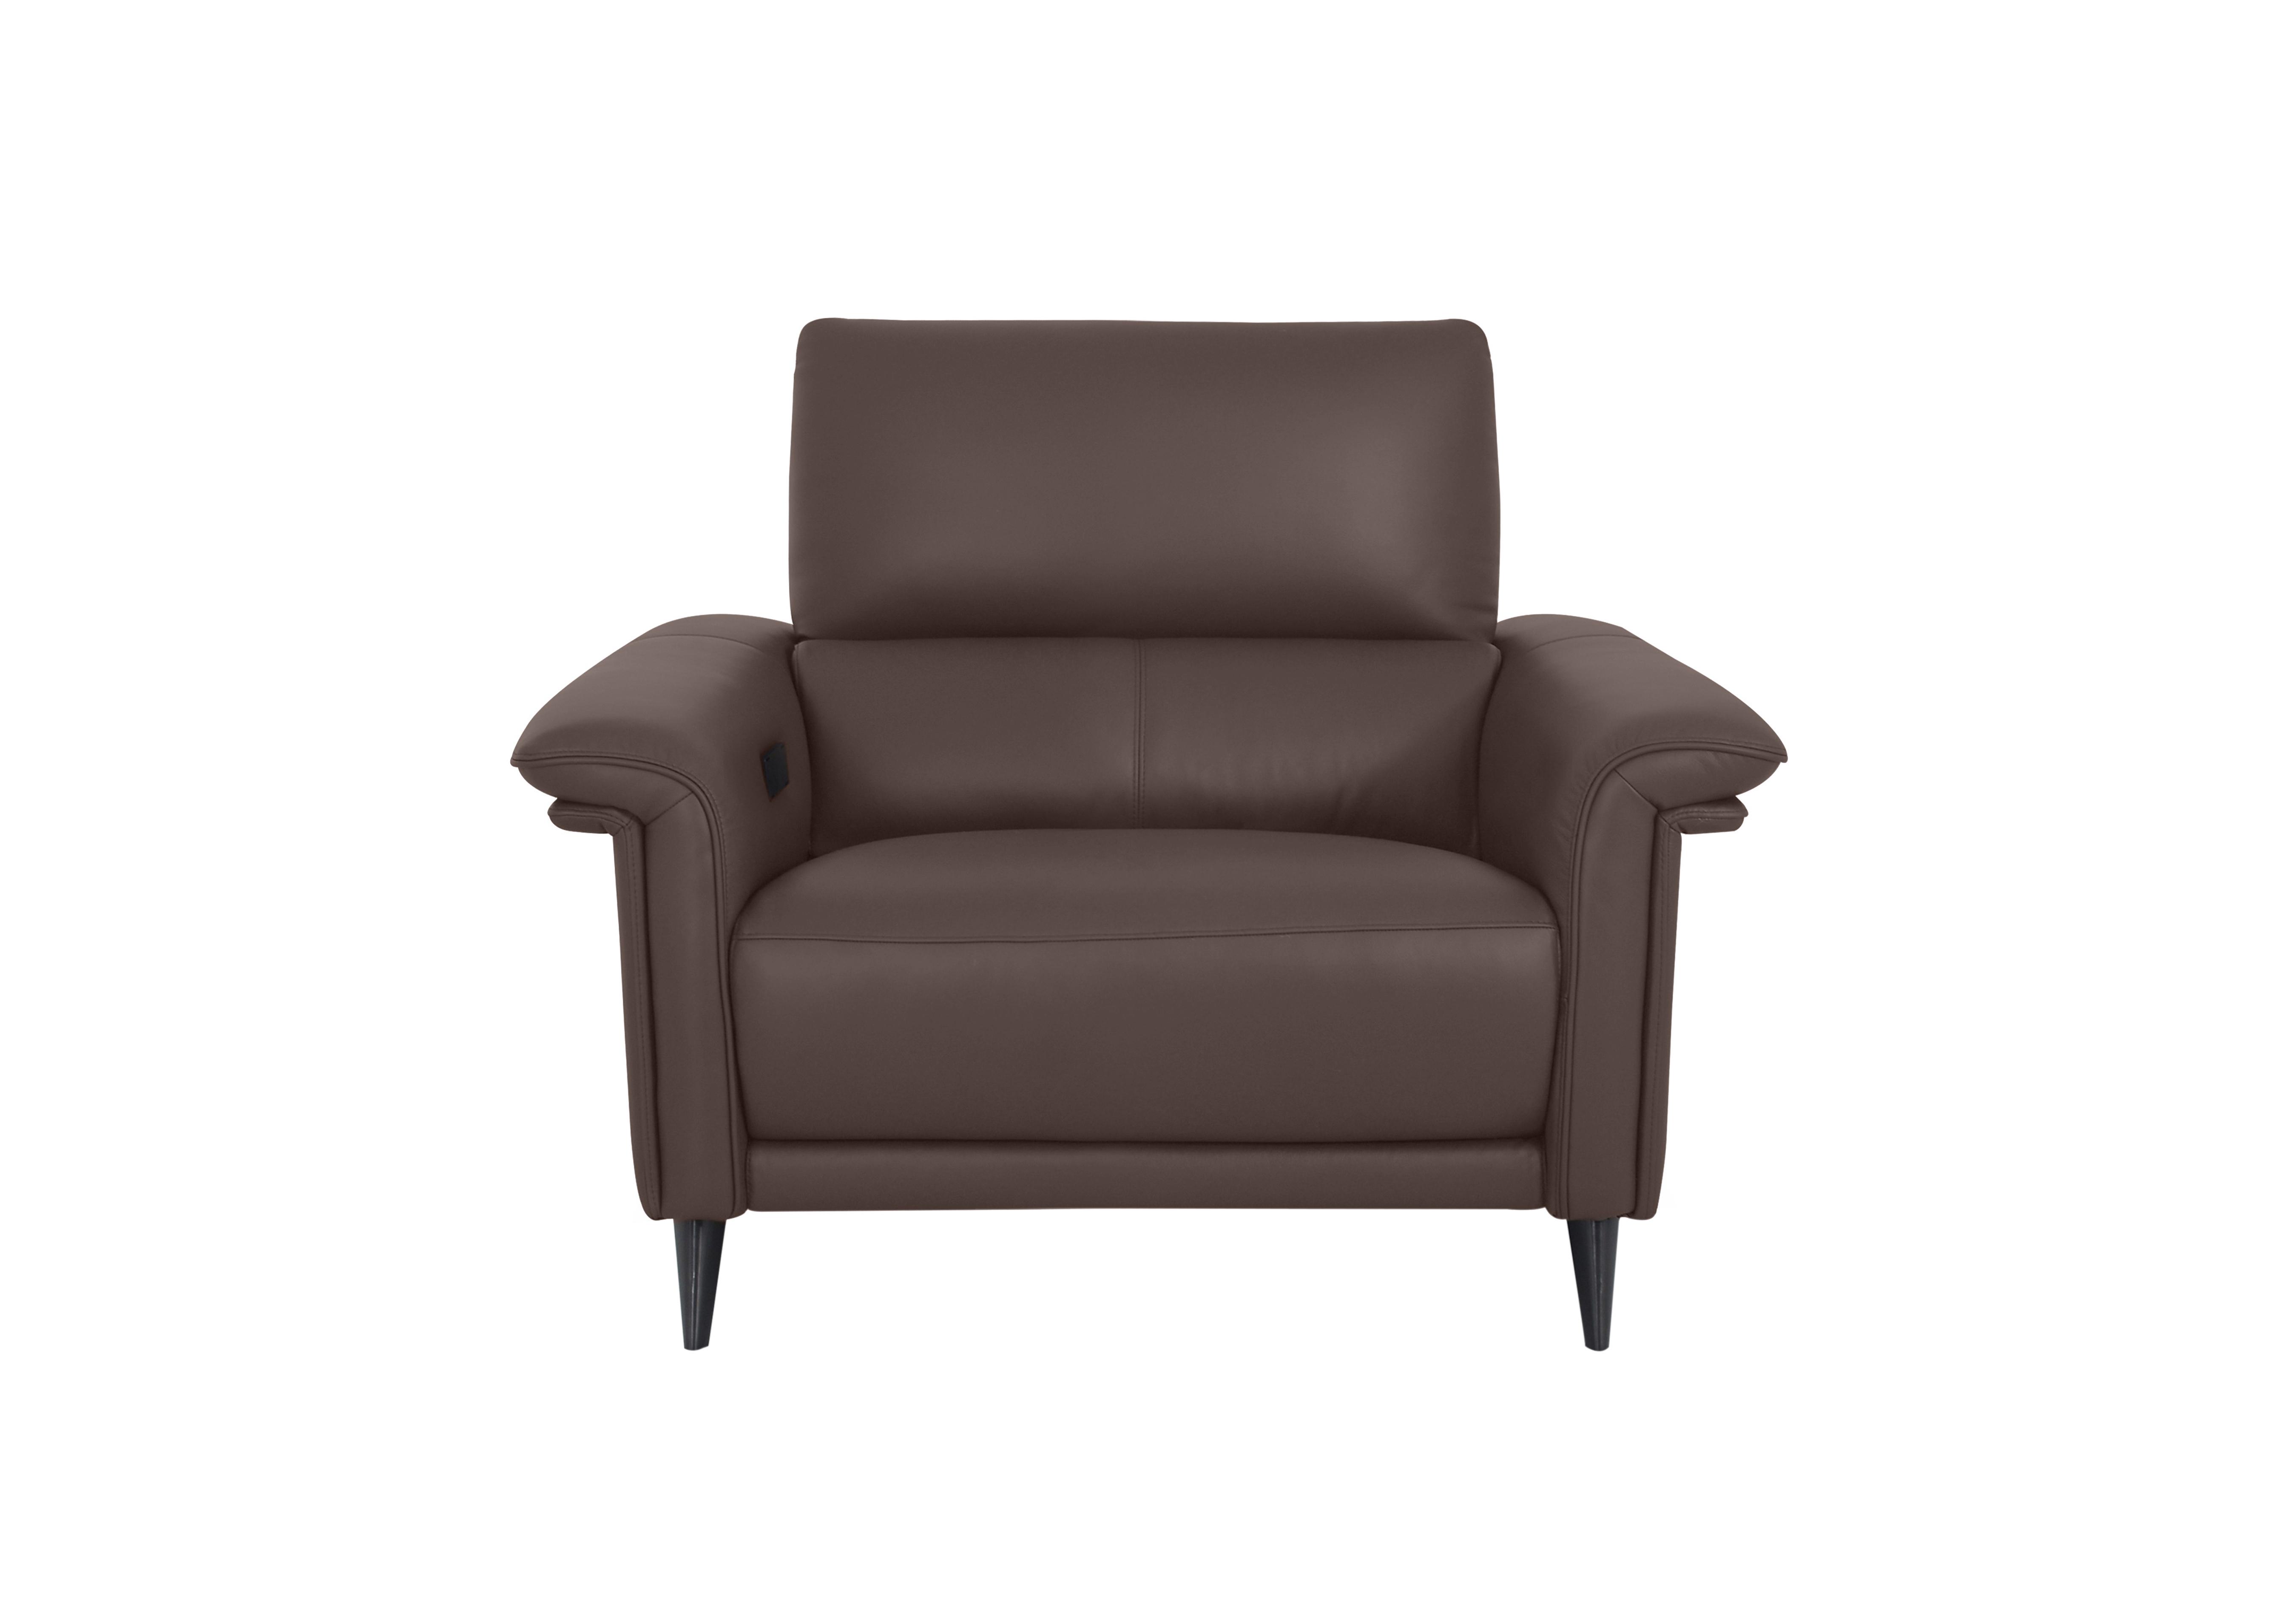 Huxley Leather Chair in Nn-512e Cacao Brown on Furniture Village